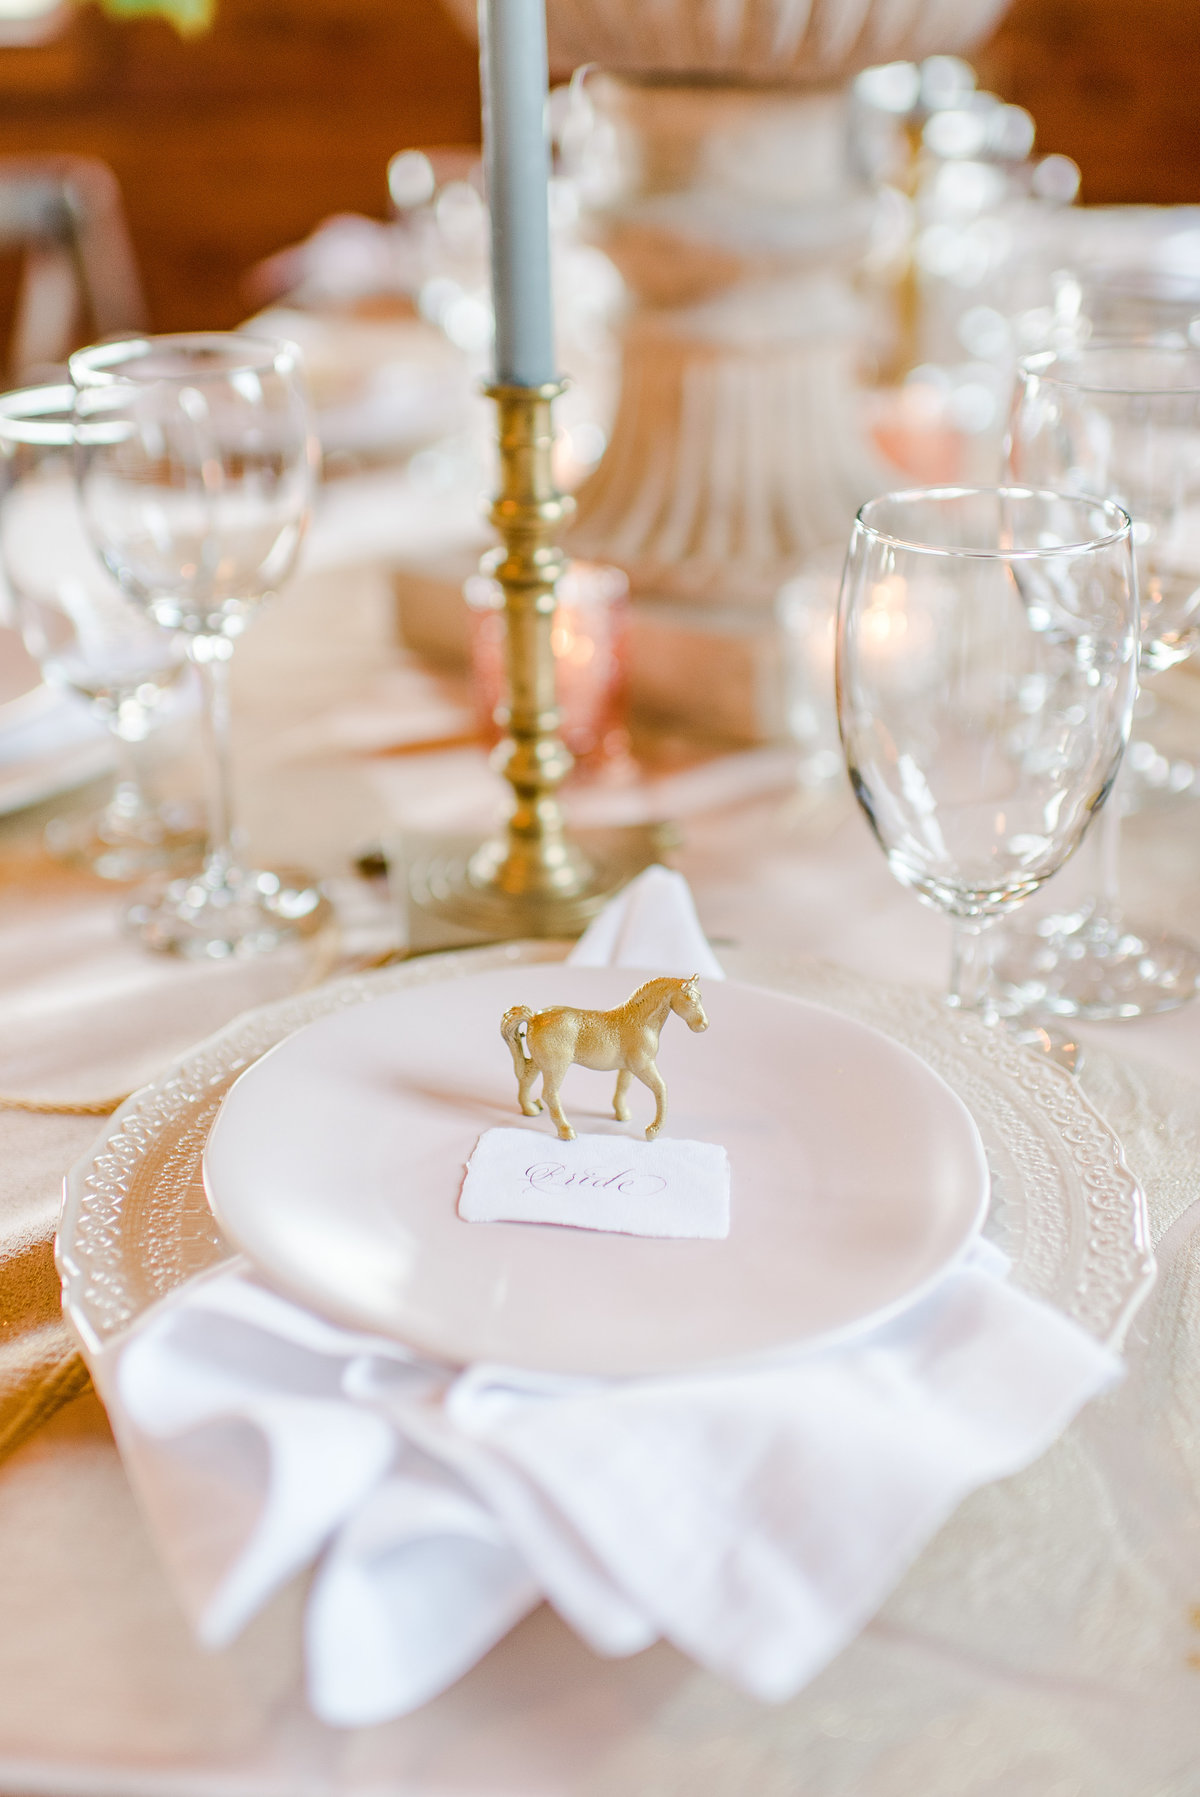 Stable View Wedding Photographer - Horse details on  wedding table